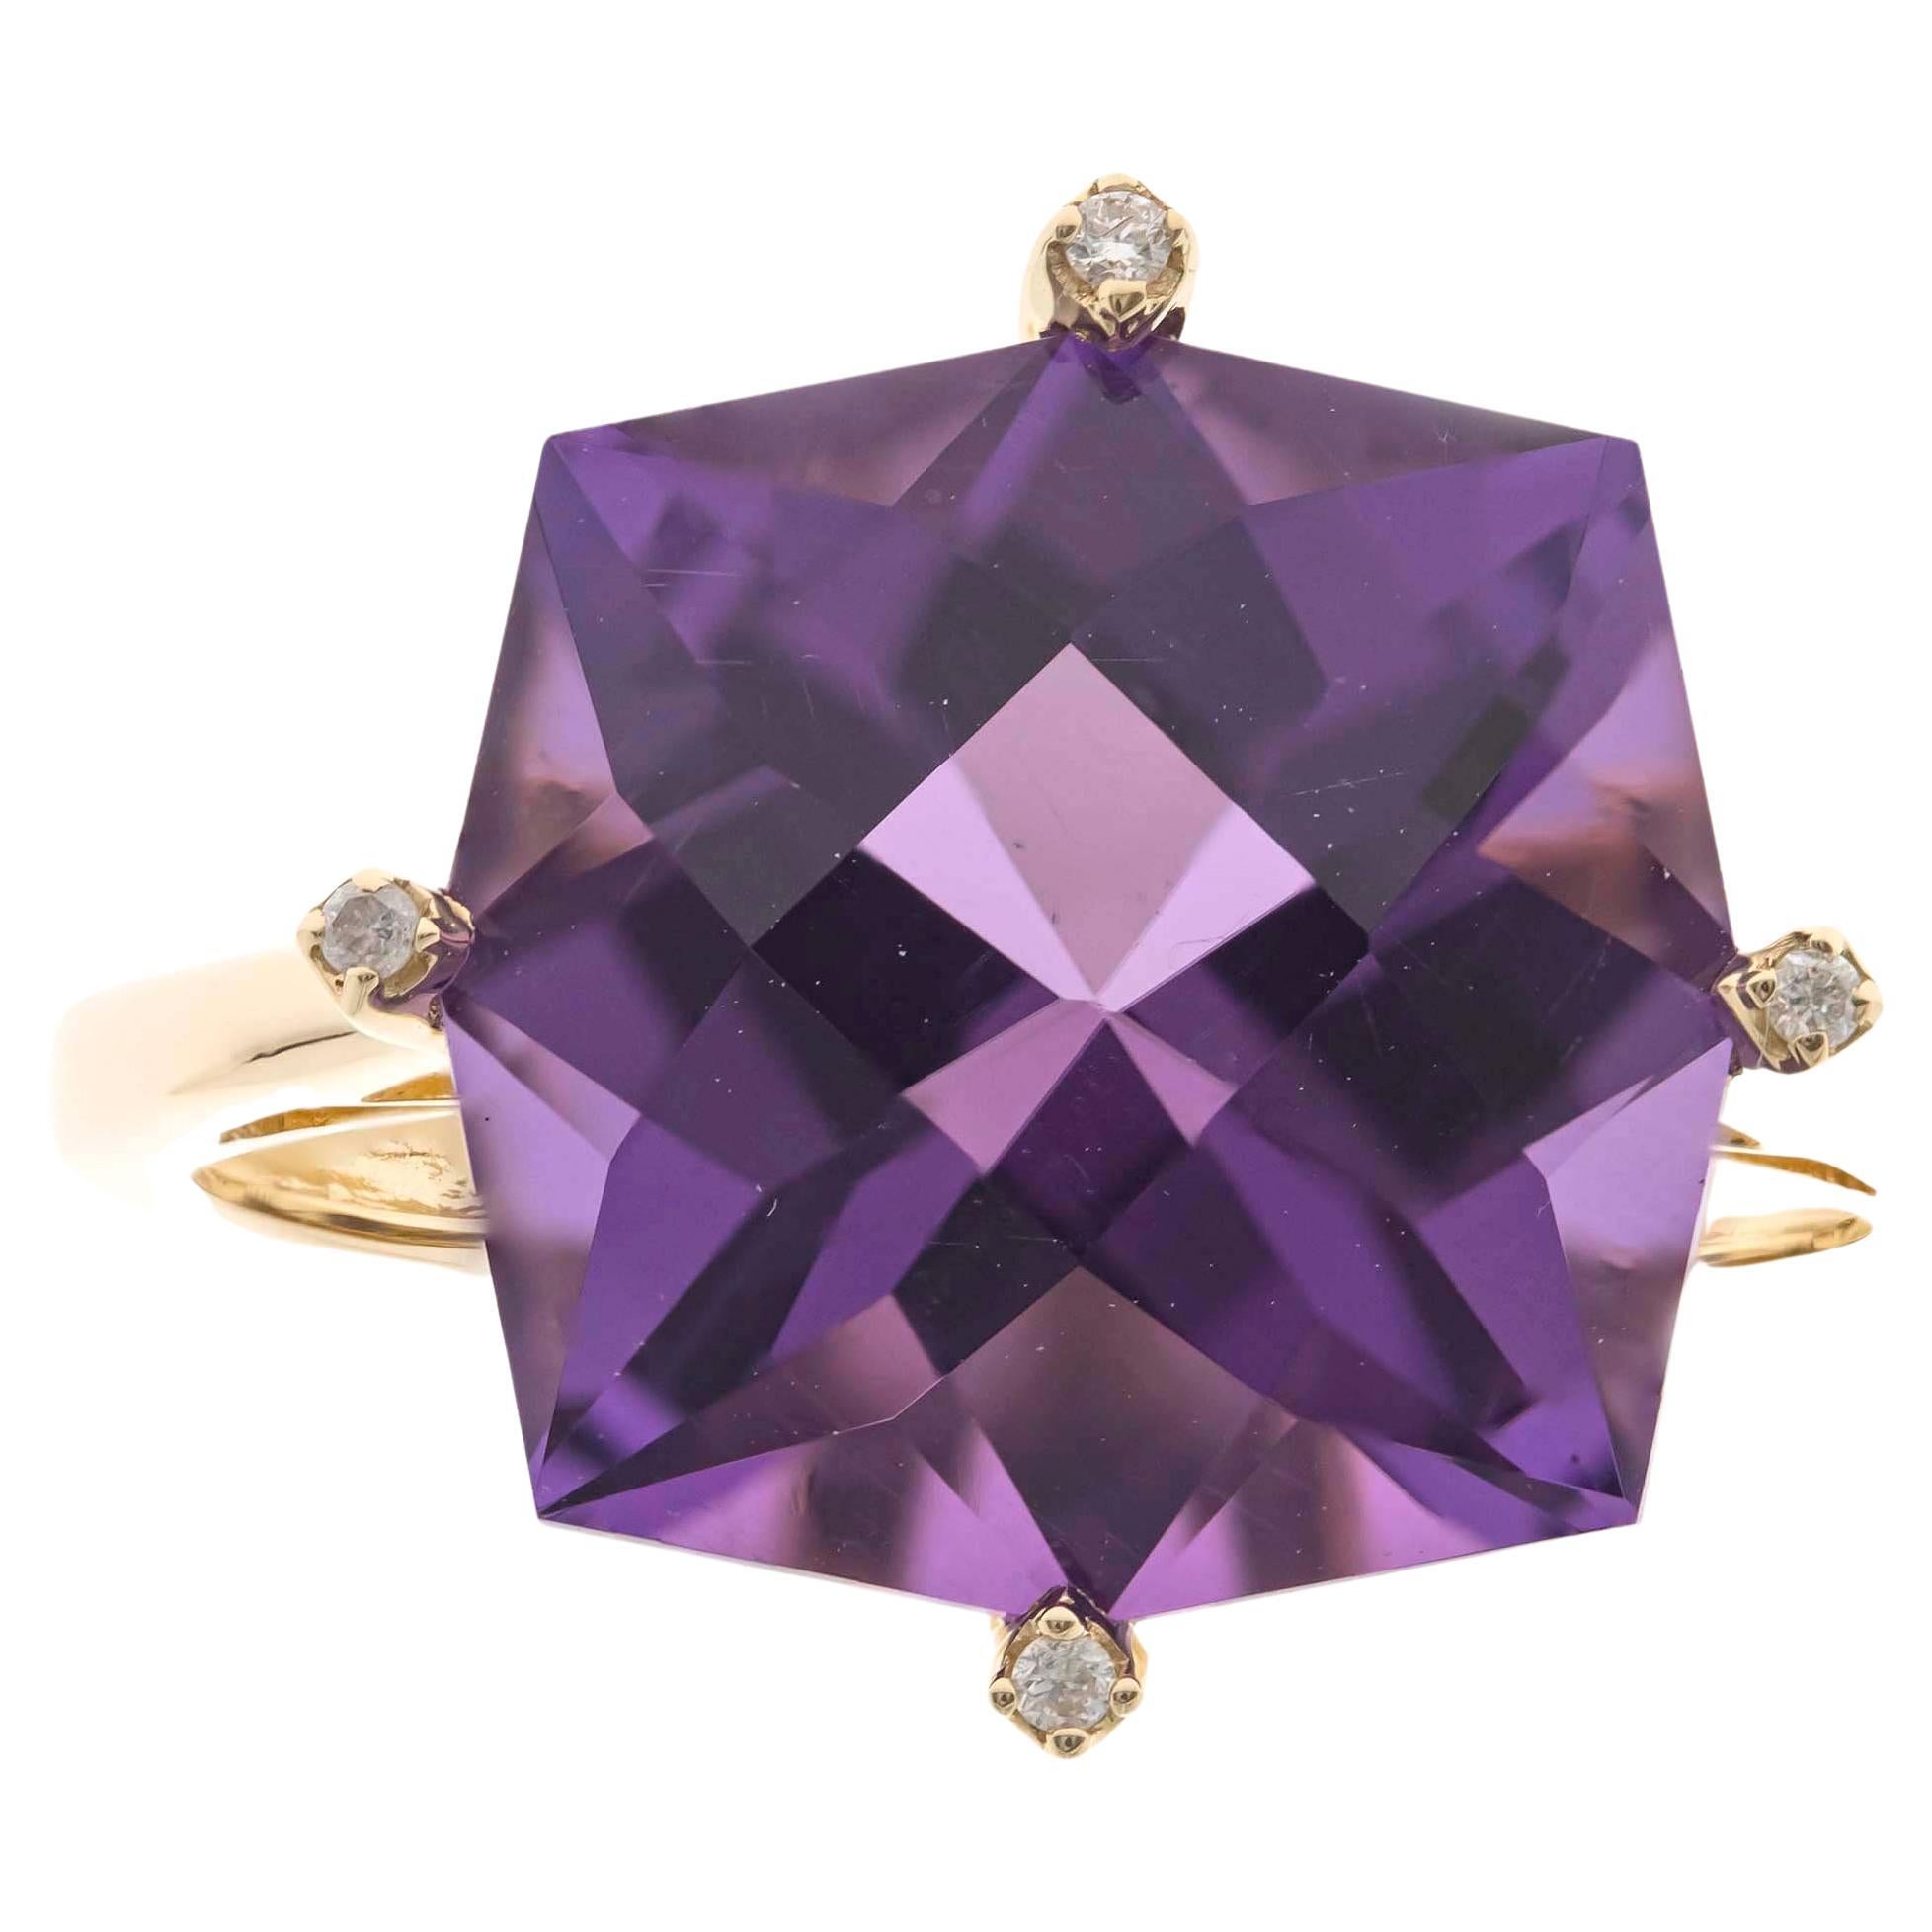 5.42 carat Cushion-cut Amethyst With Diamond accents 14K Yellow Gold Ring. For Sale